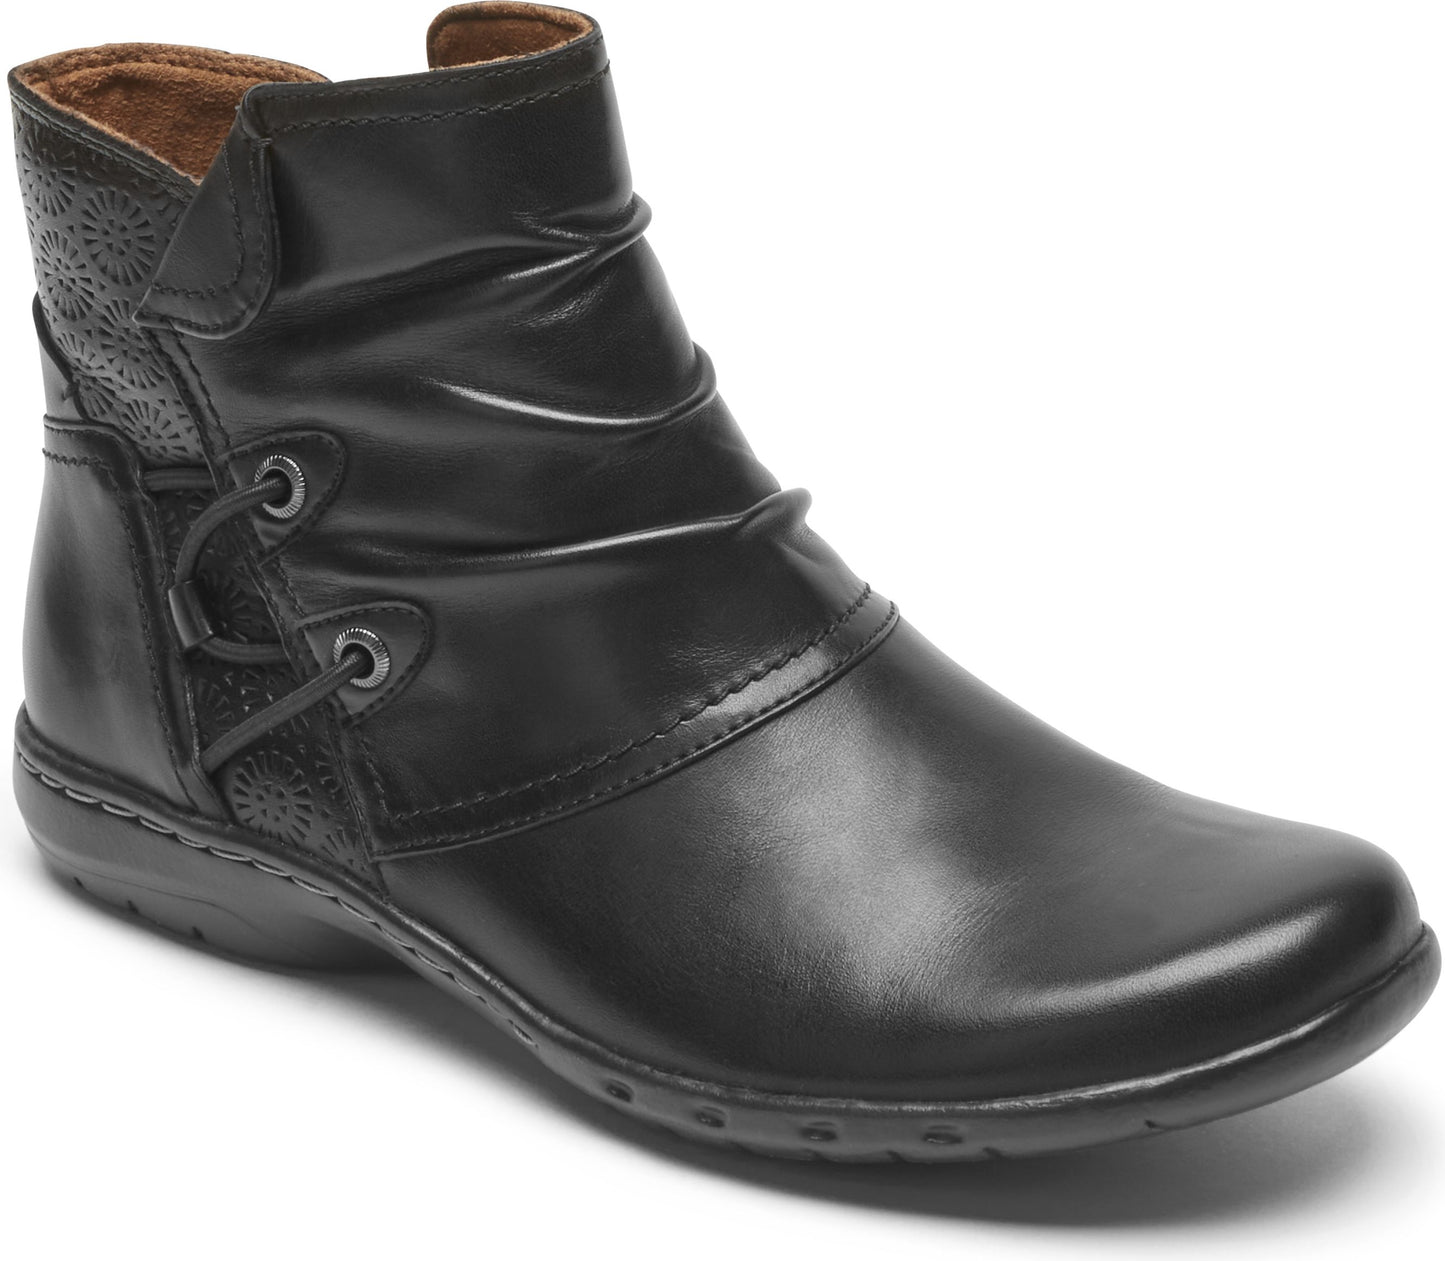 Cobb Hill Boots Penfield Ruch Boot Black - Wide